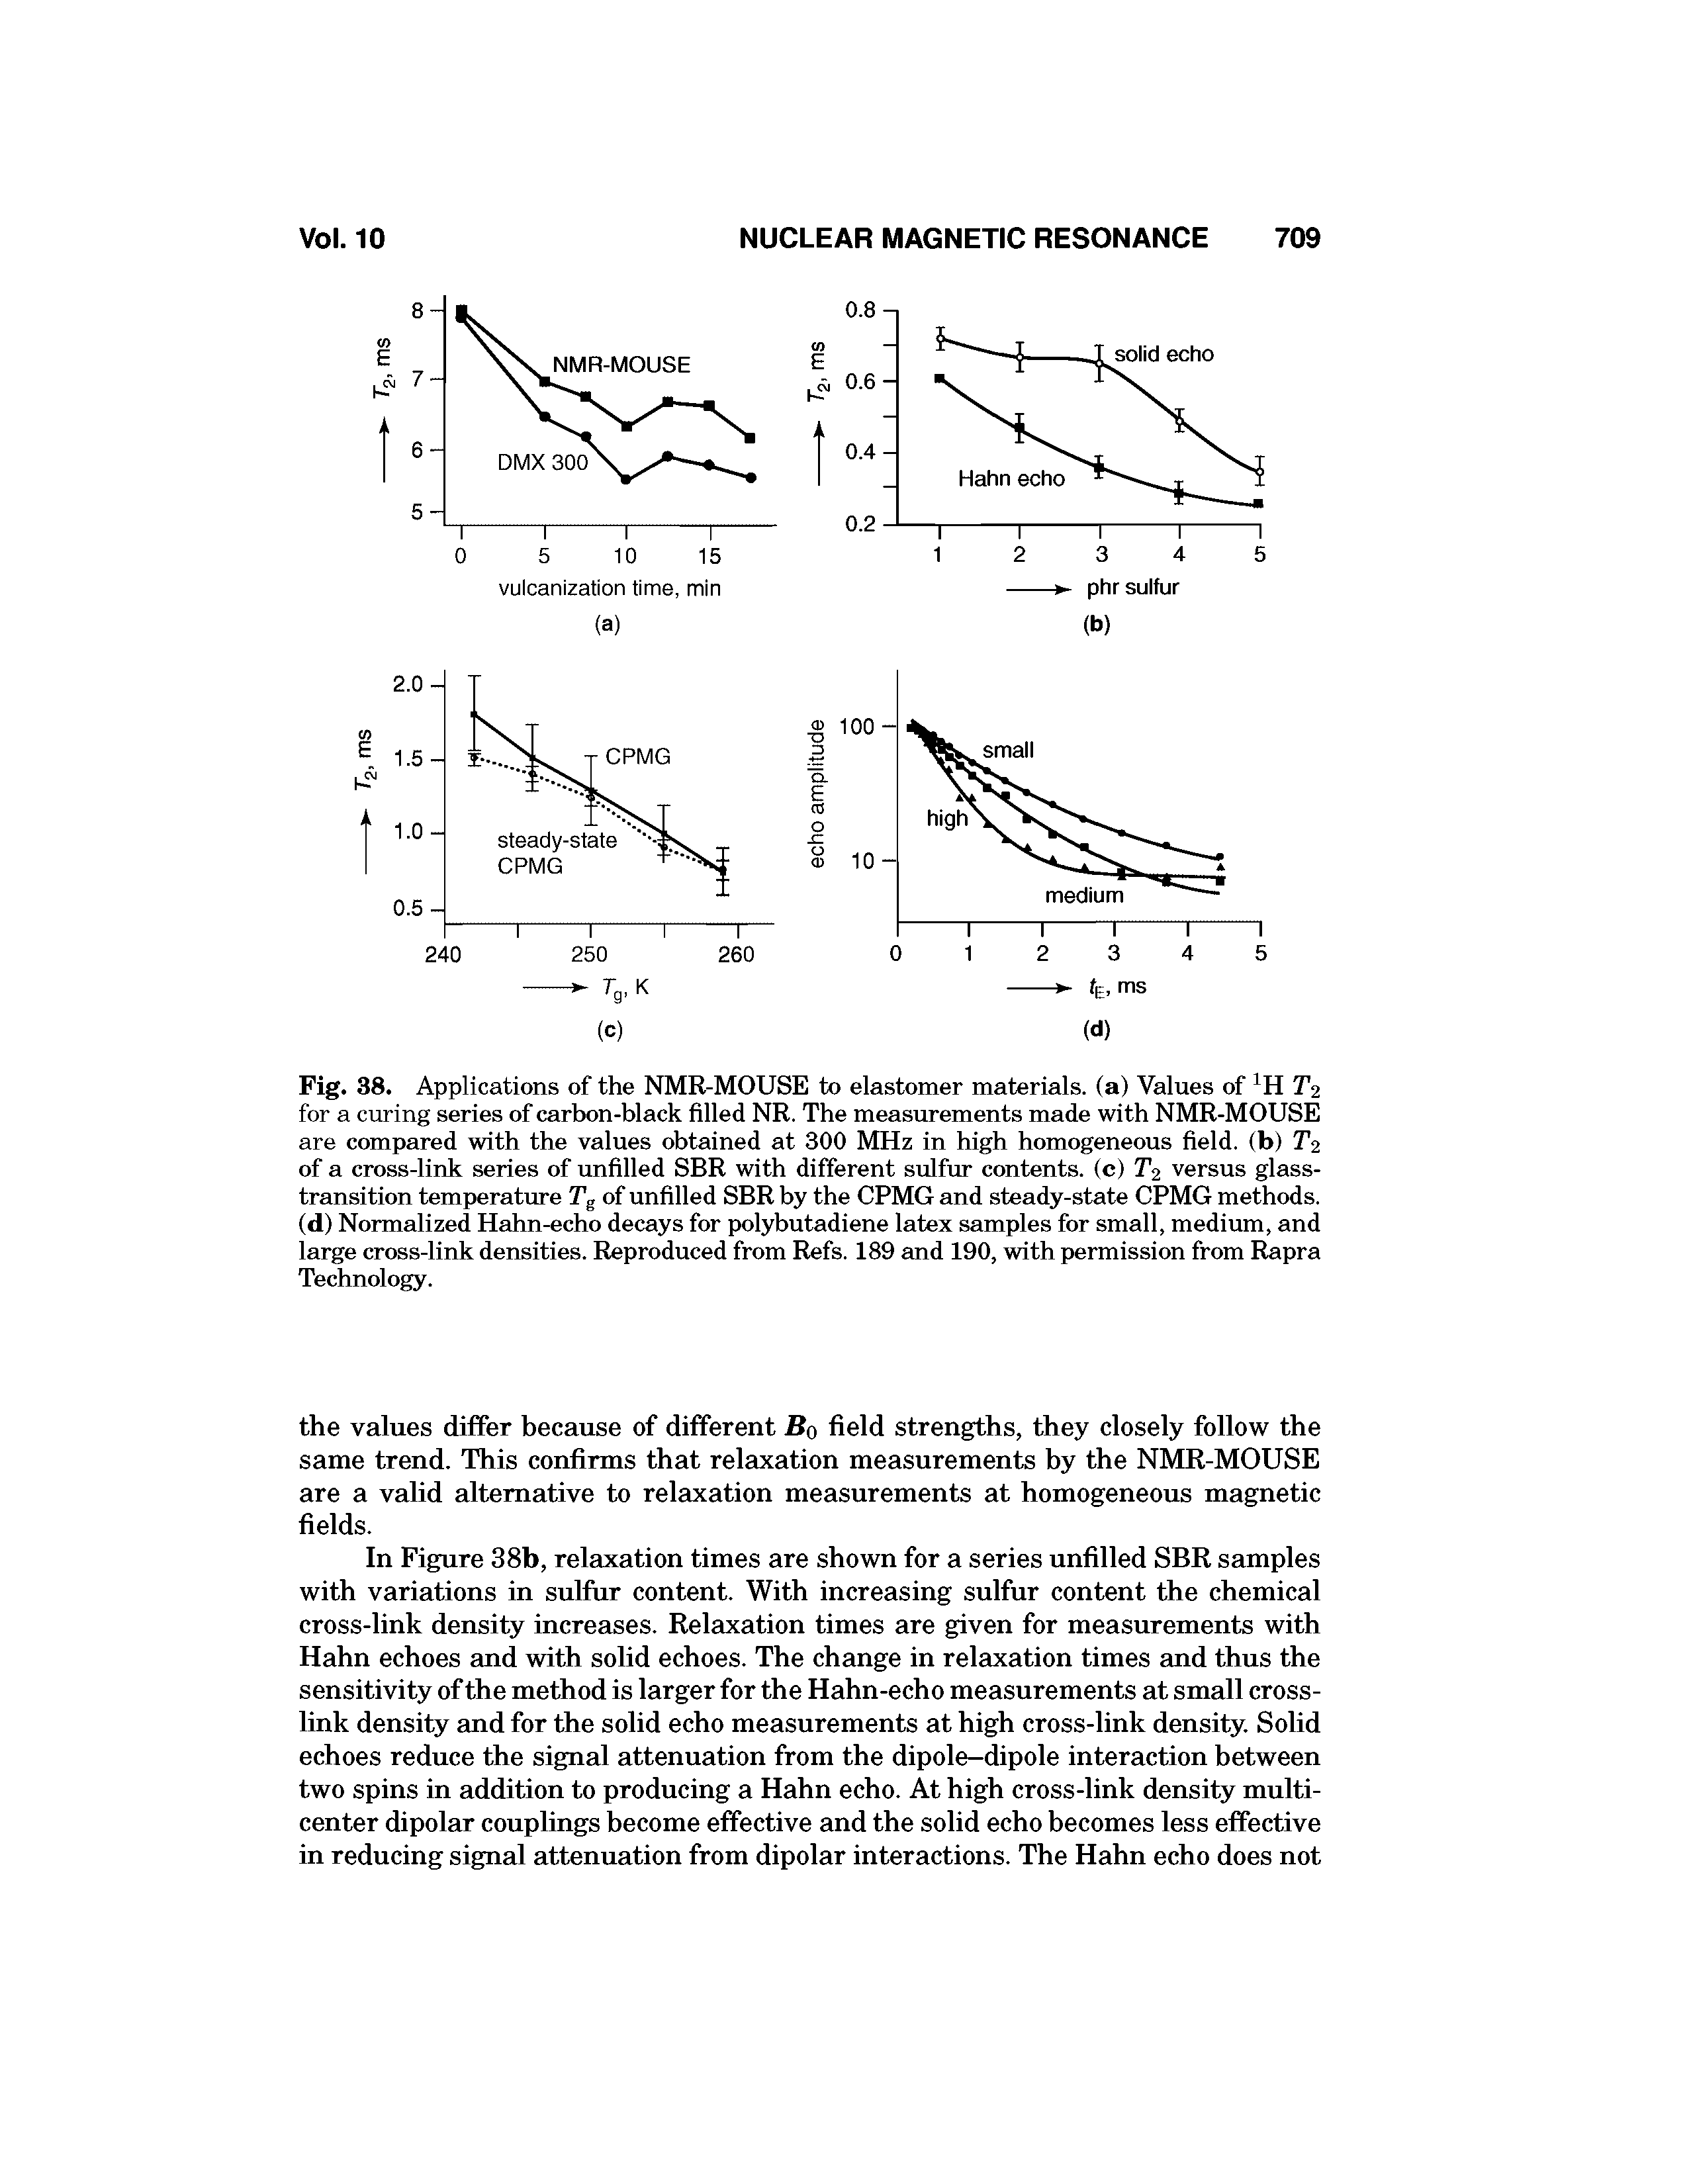 Fig. 38. Applications of the NMR-MOUSE to elastomer materials, (a) Values of T2 for a curing series of carbon-black filled NR. The measurements made with NMR-MOUSE are compared with the values obtained at 300 MHz in high homogeneous field, (b) T2 of a cross-link series of unfilled SBR with different sulfur contents, (c) T2 versus glass-transition temperature Tg of unfilled SBR by the CPMG and steady-state CPMG methods, (d) Normalized Hahn-echo decays for polybutadiene latex samples for small, medium, and large cross-link densities. Reproduced from Refs. 189 and 190, with permission from Rapra Technology.